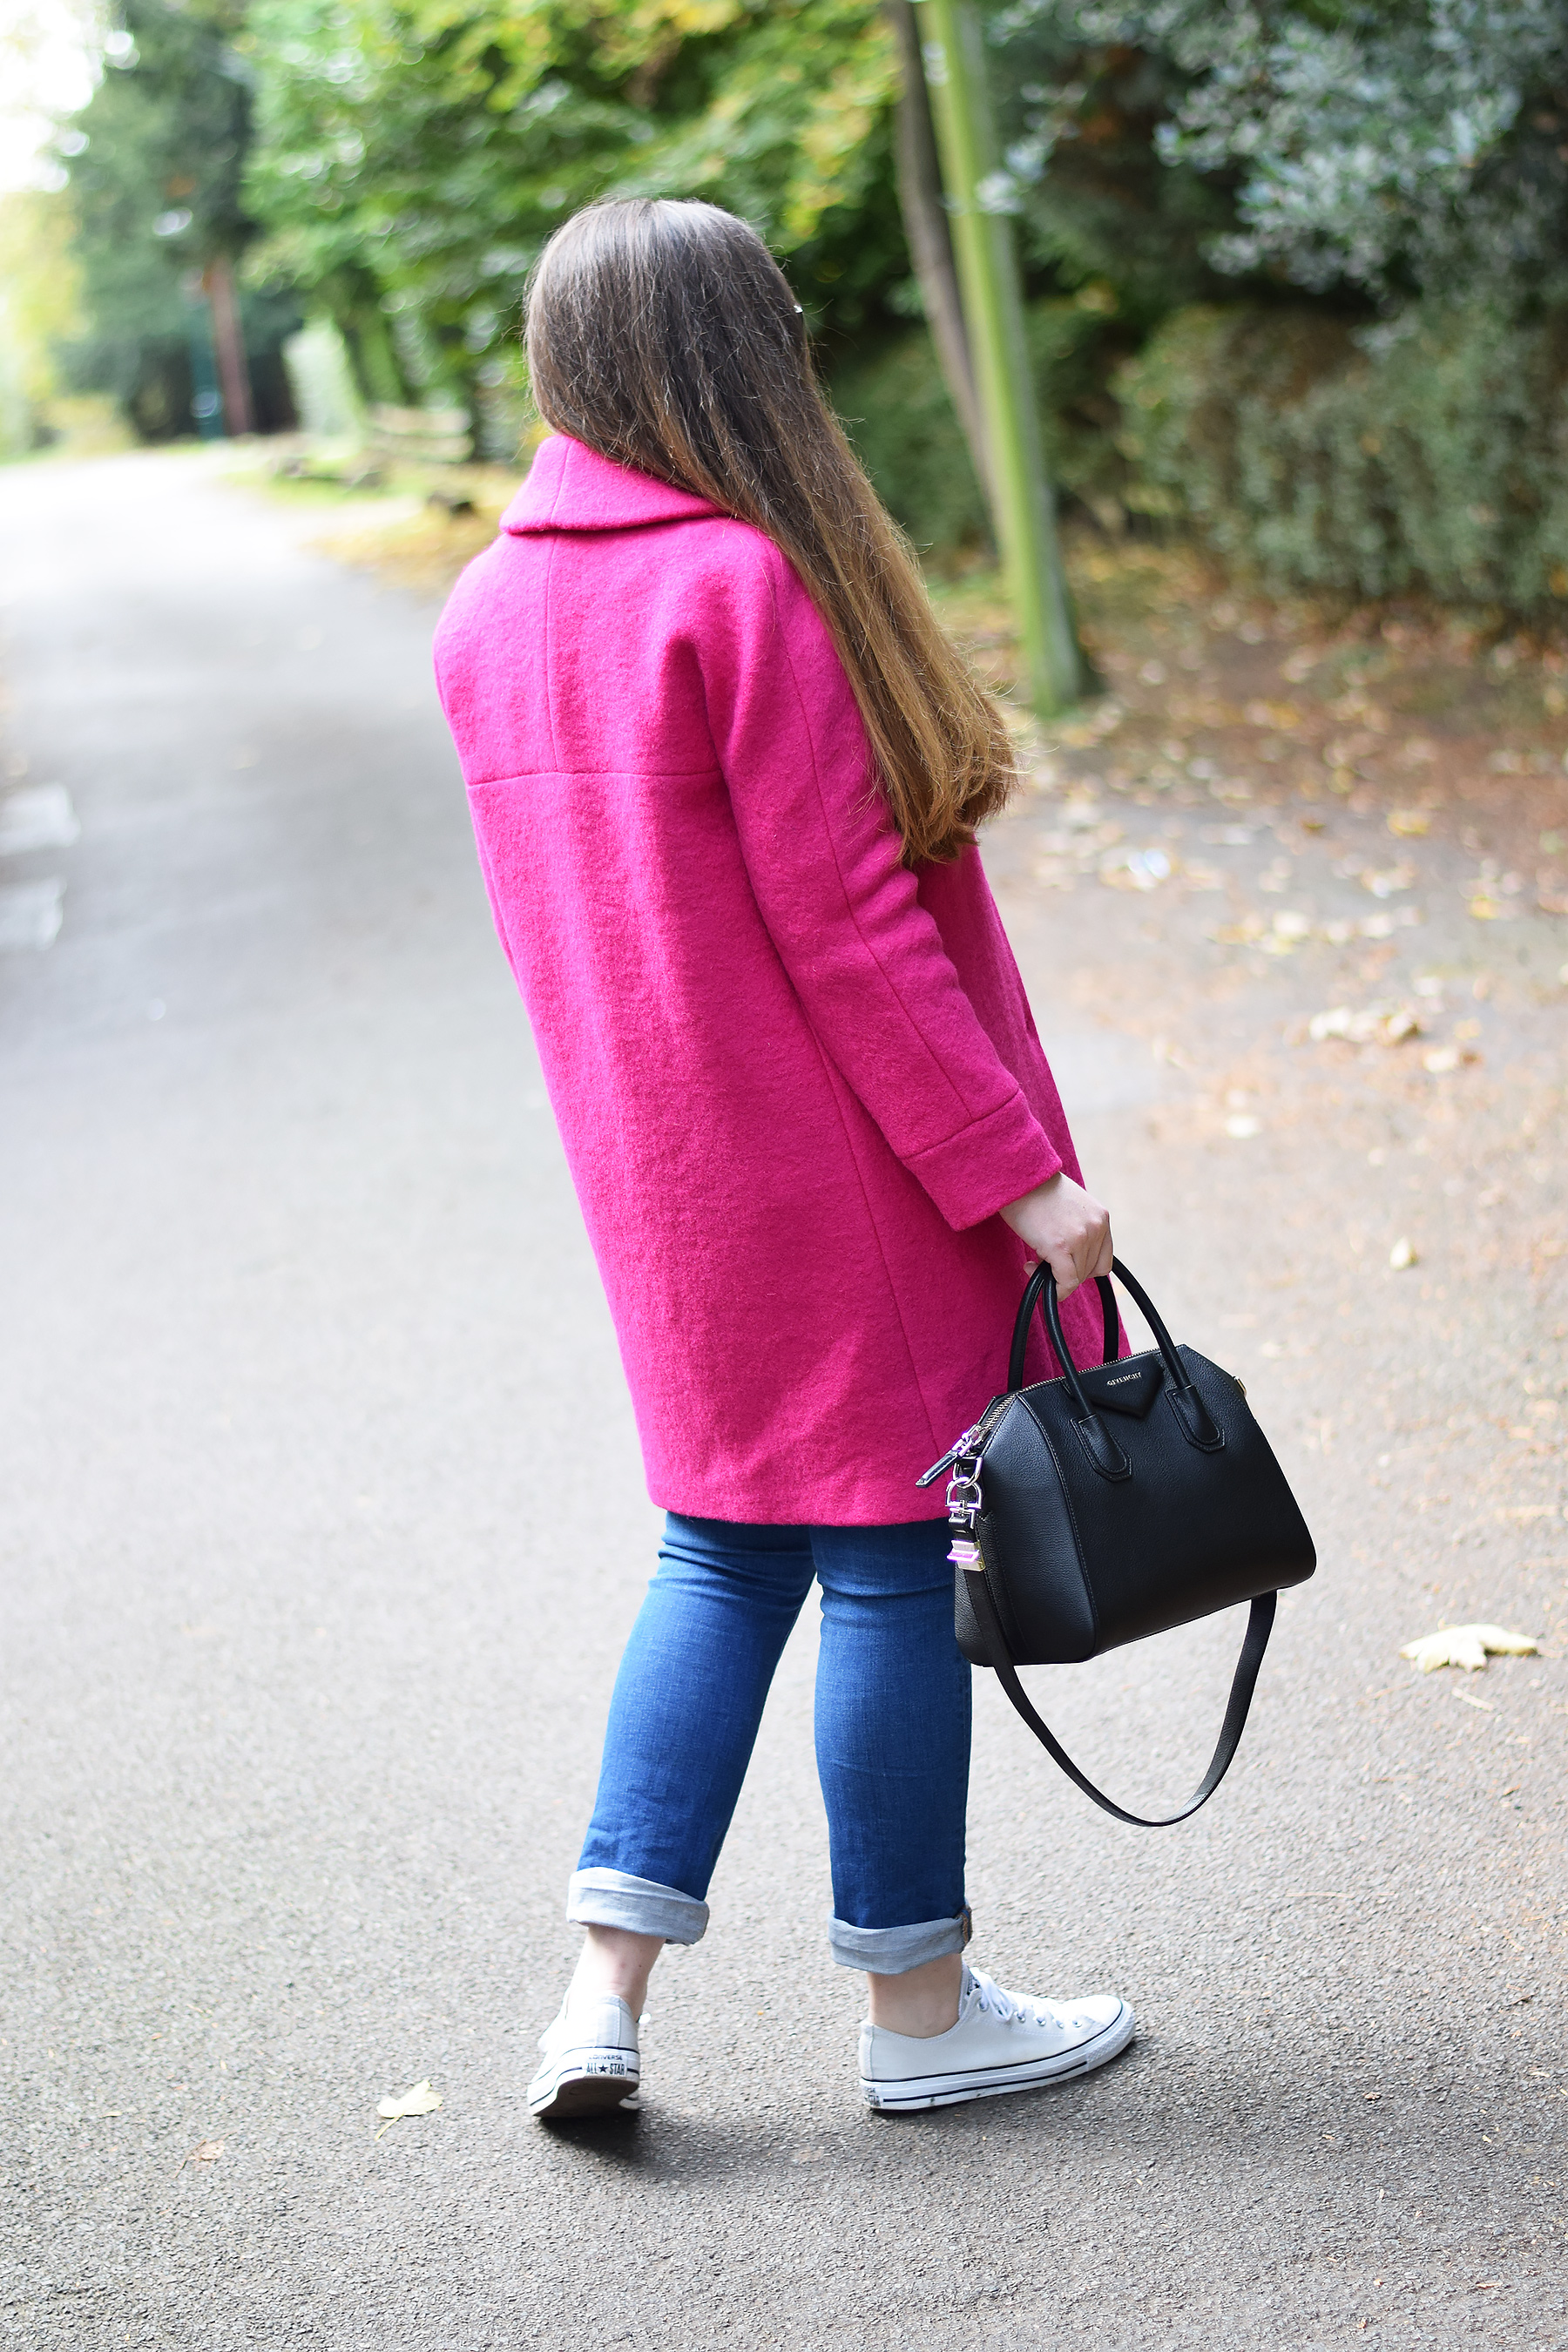 How to wear a vivid pink coat